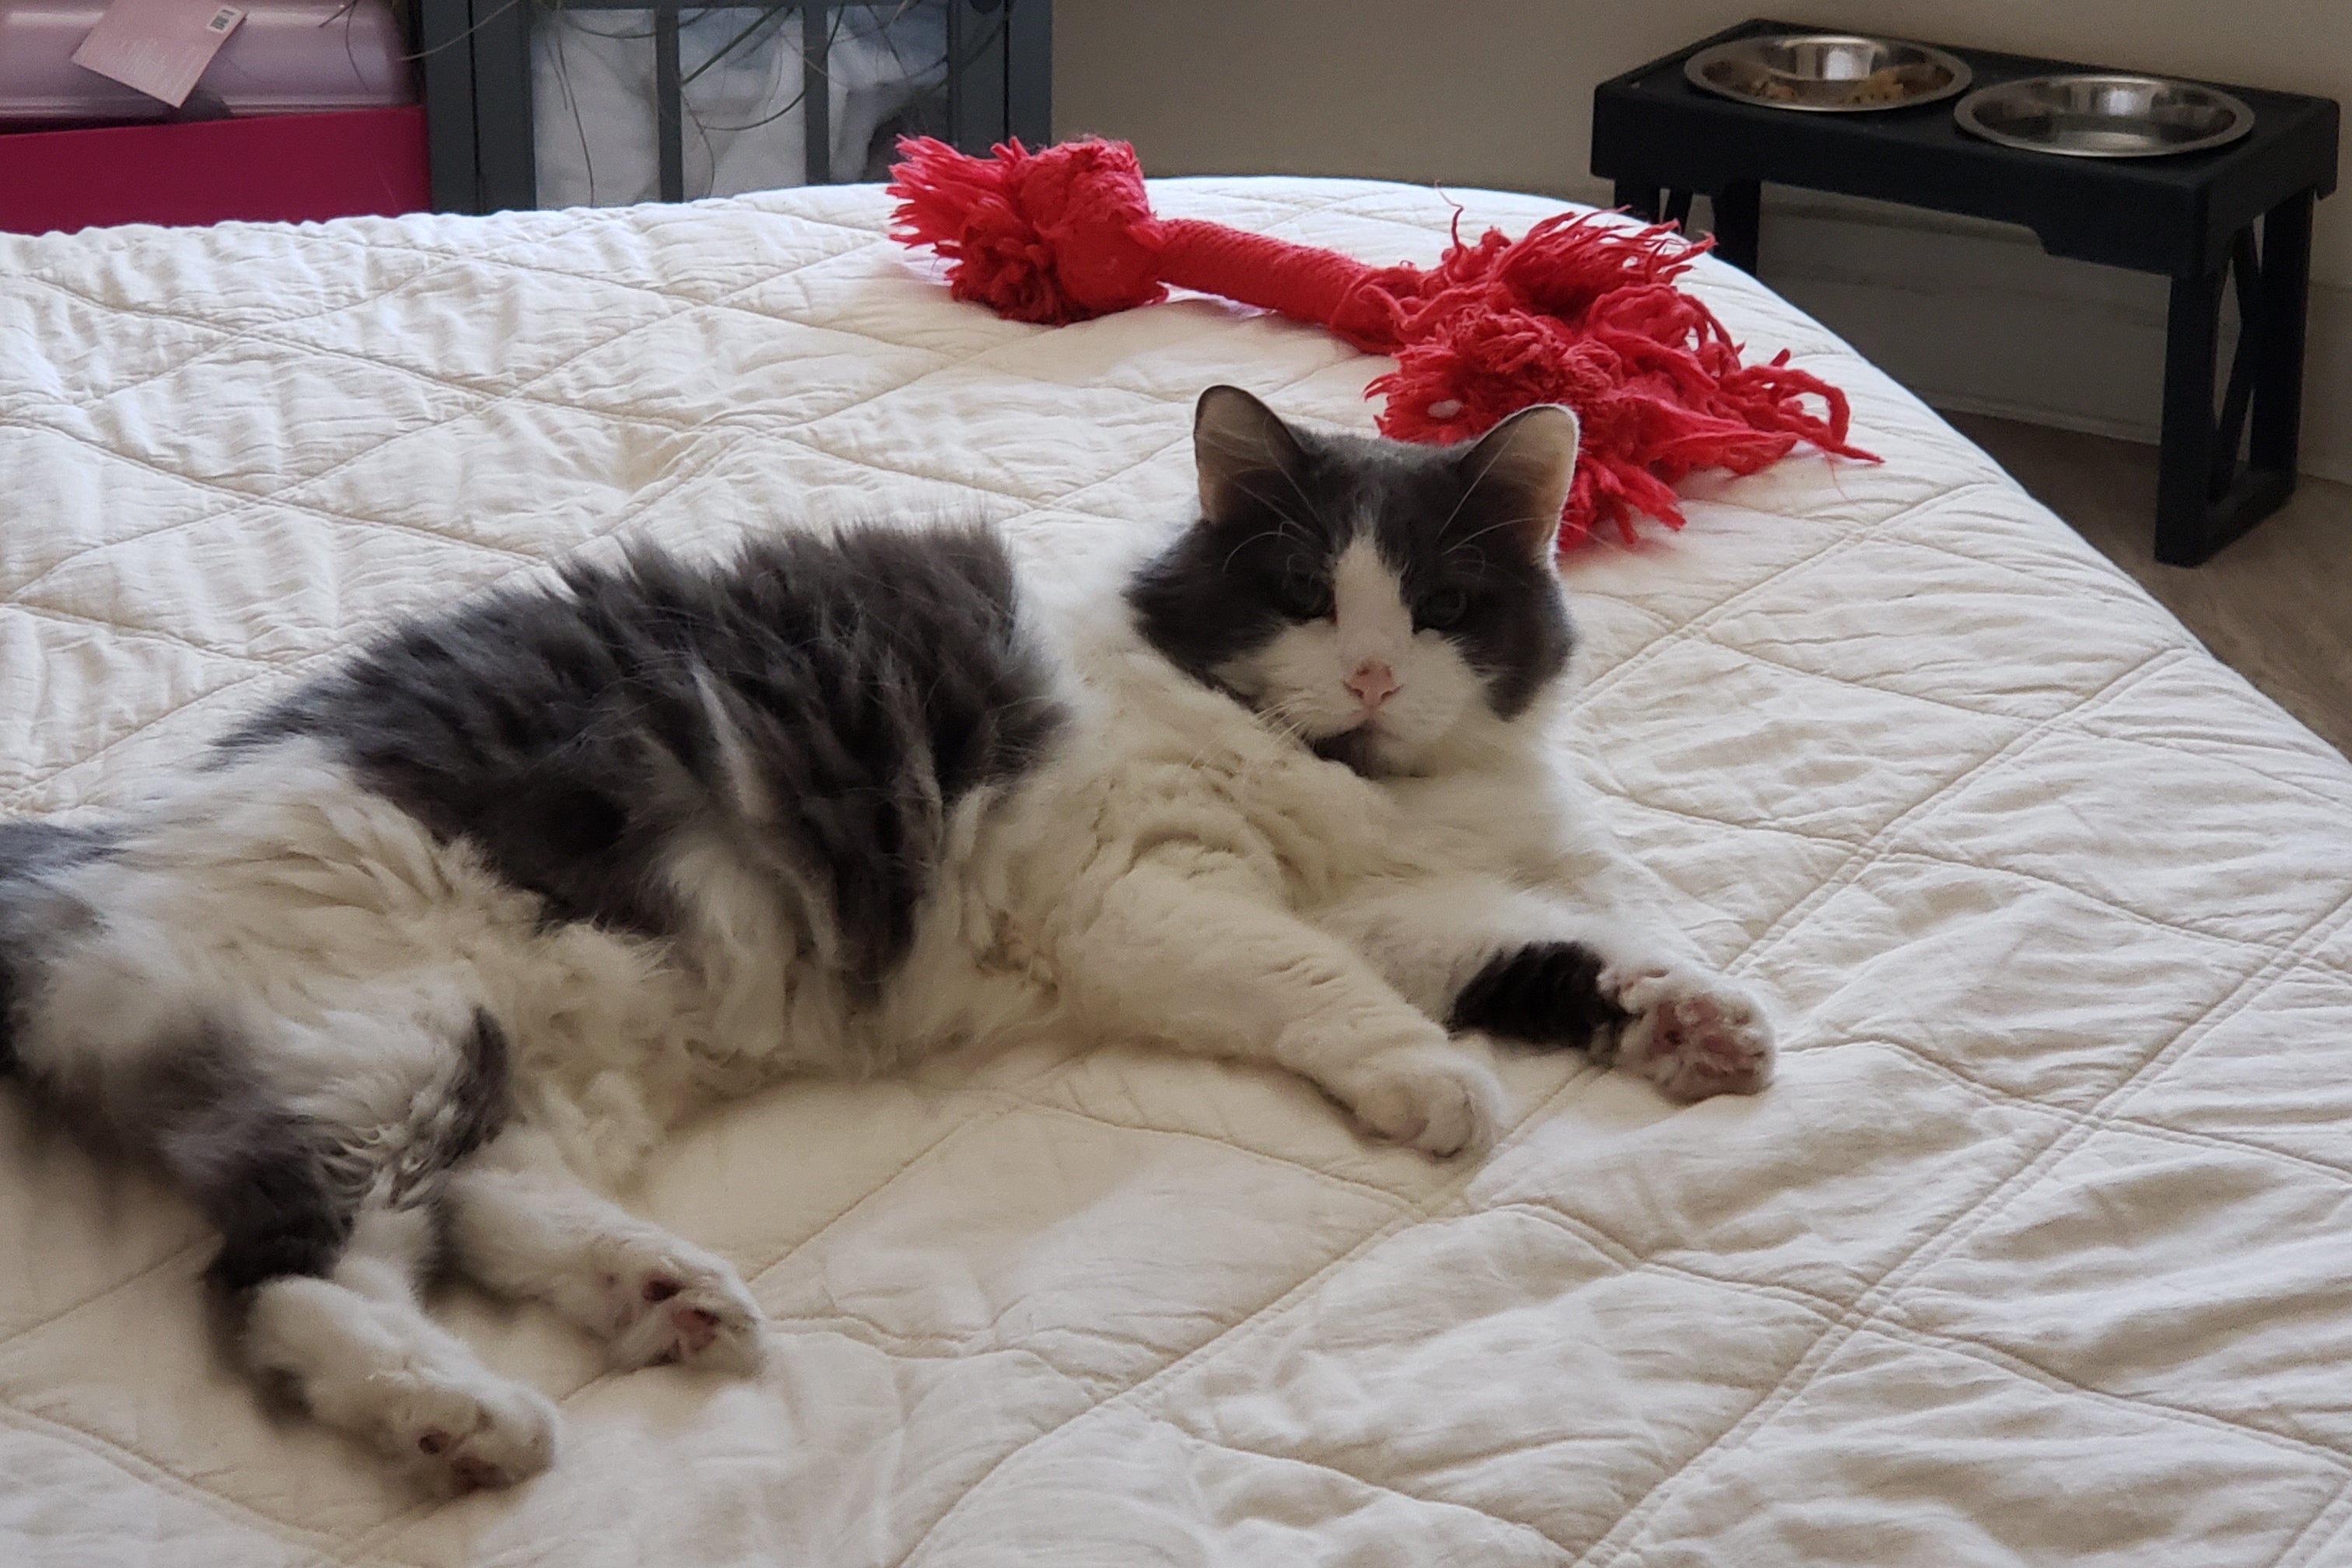 A long-haired gray and white cat sits on a bed near a red yarn toy.